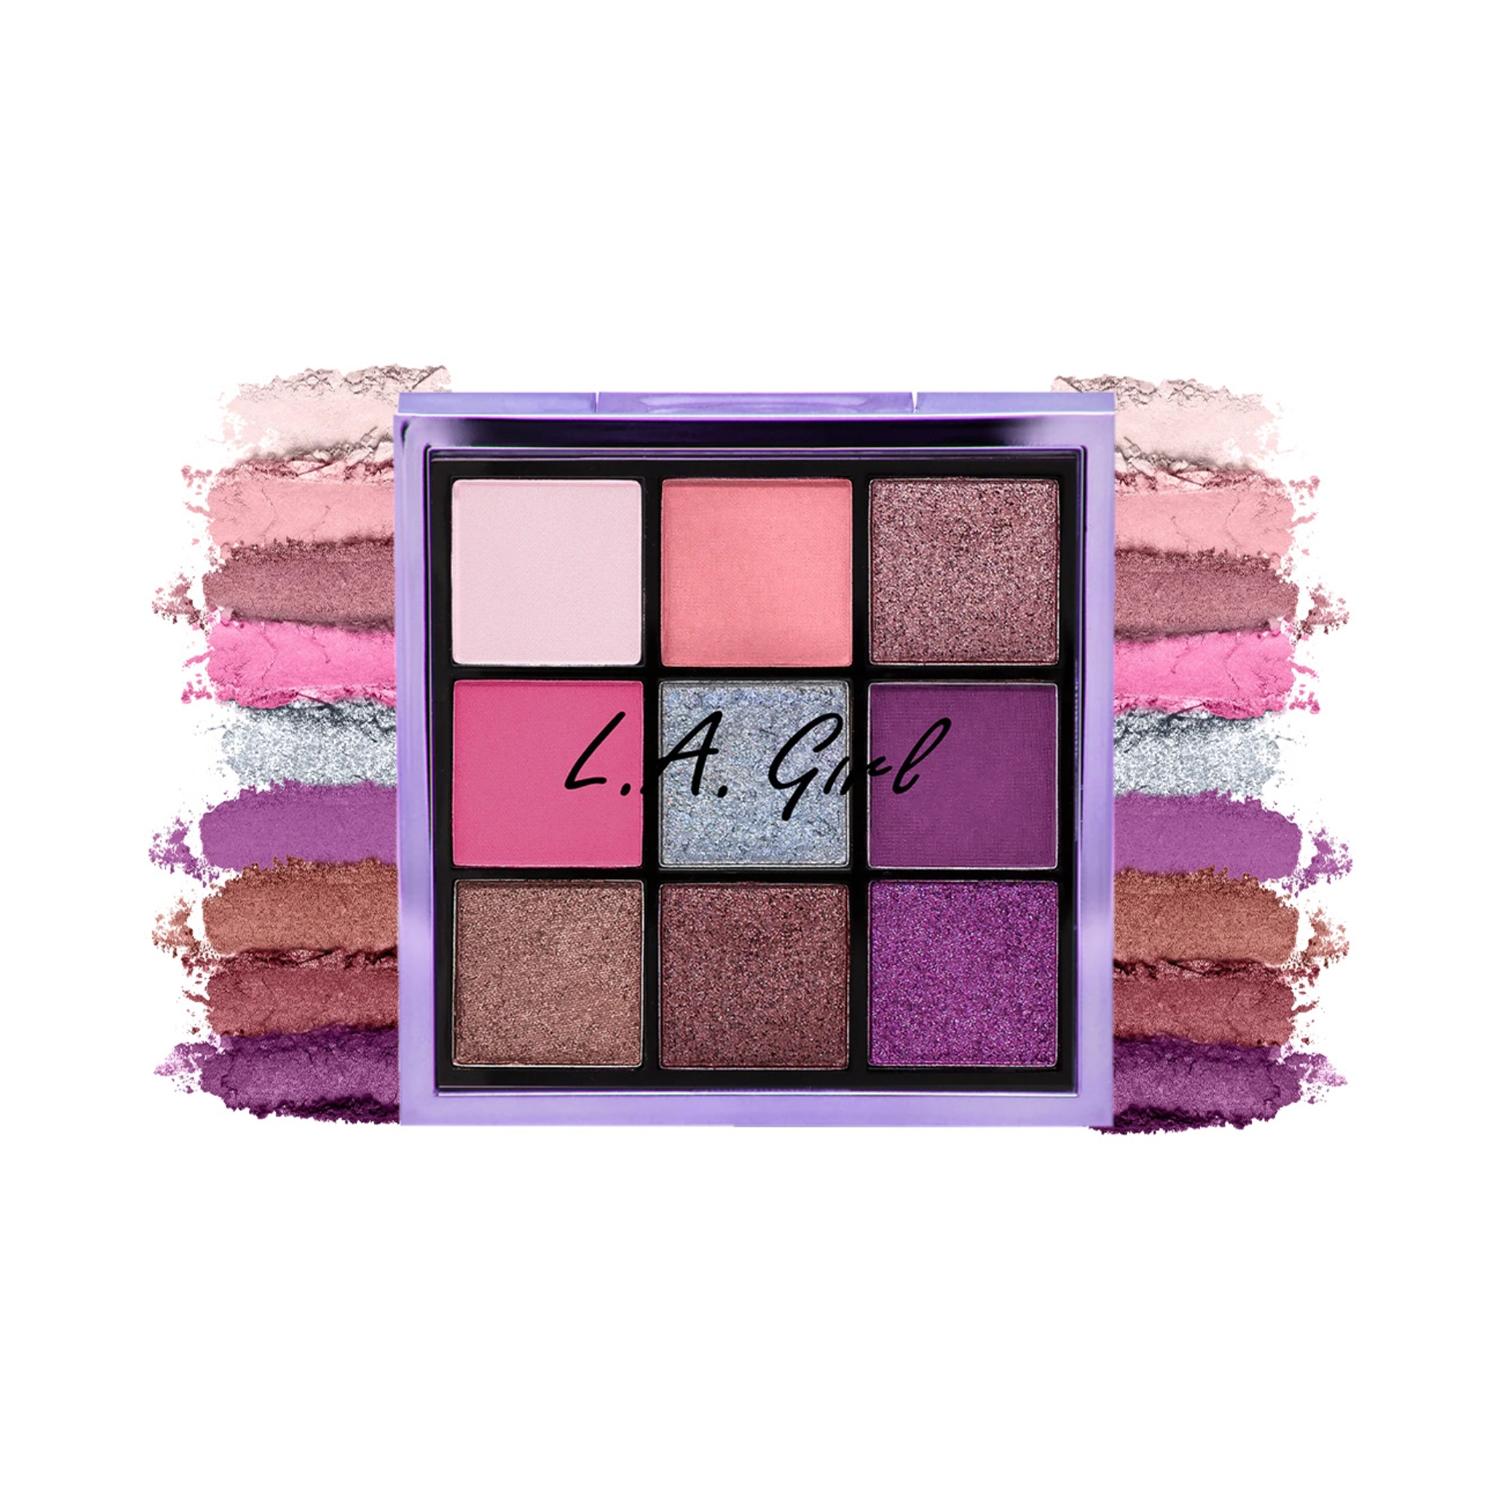 l.a. girl keep it playful 9 color eyeshadow palette - ges436 playtime (14g)